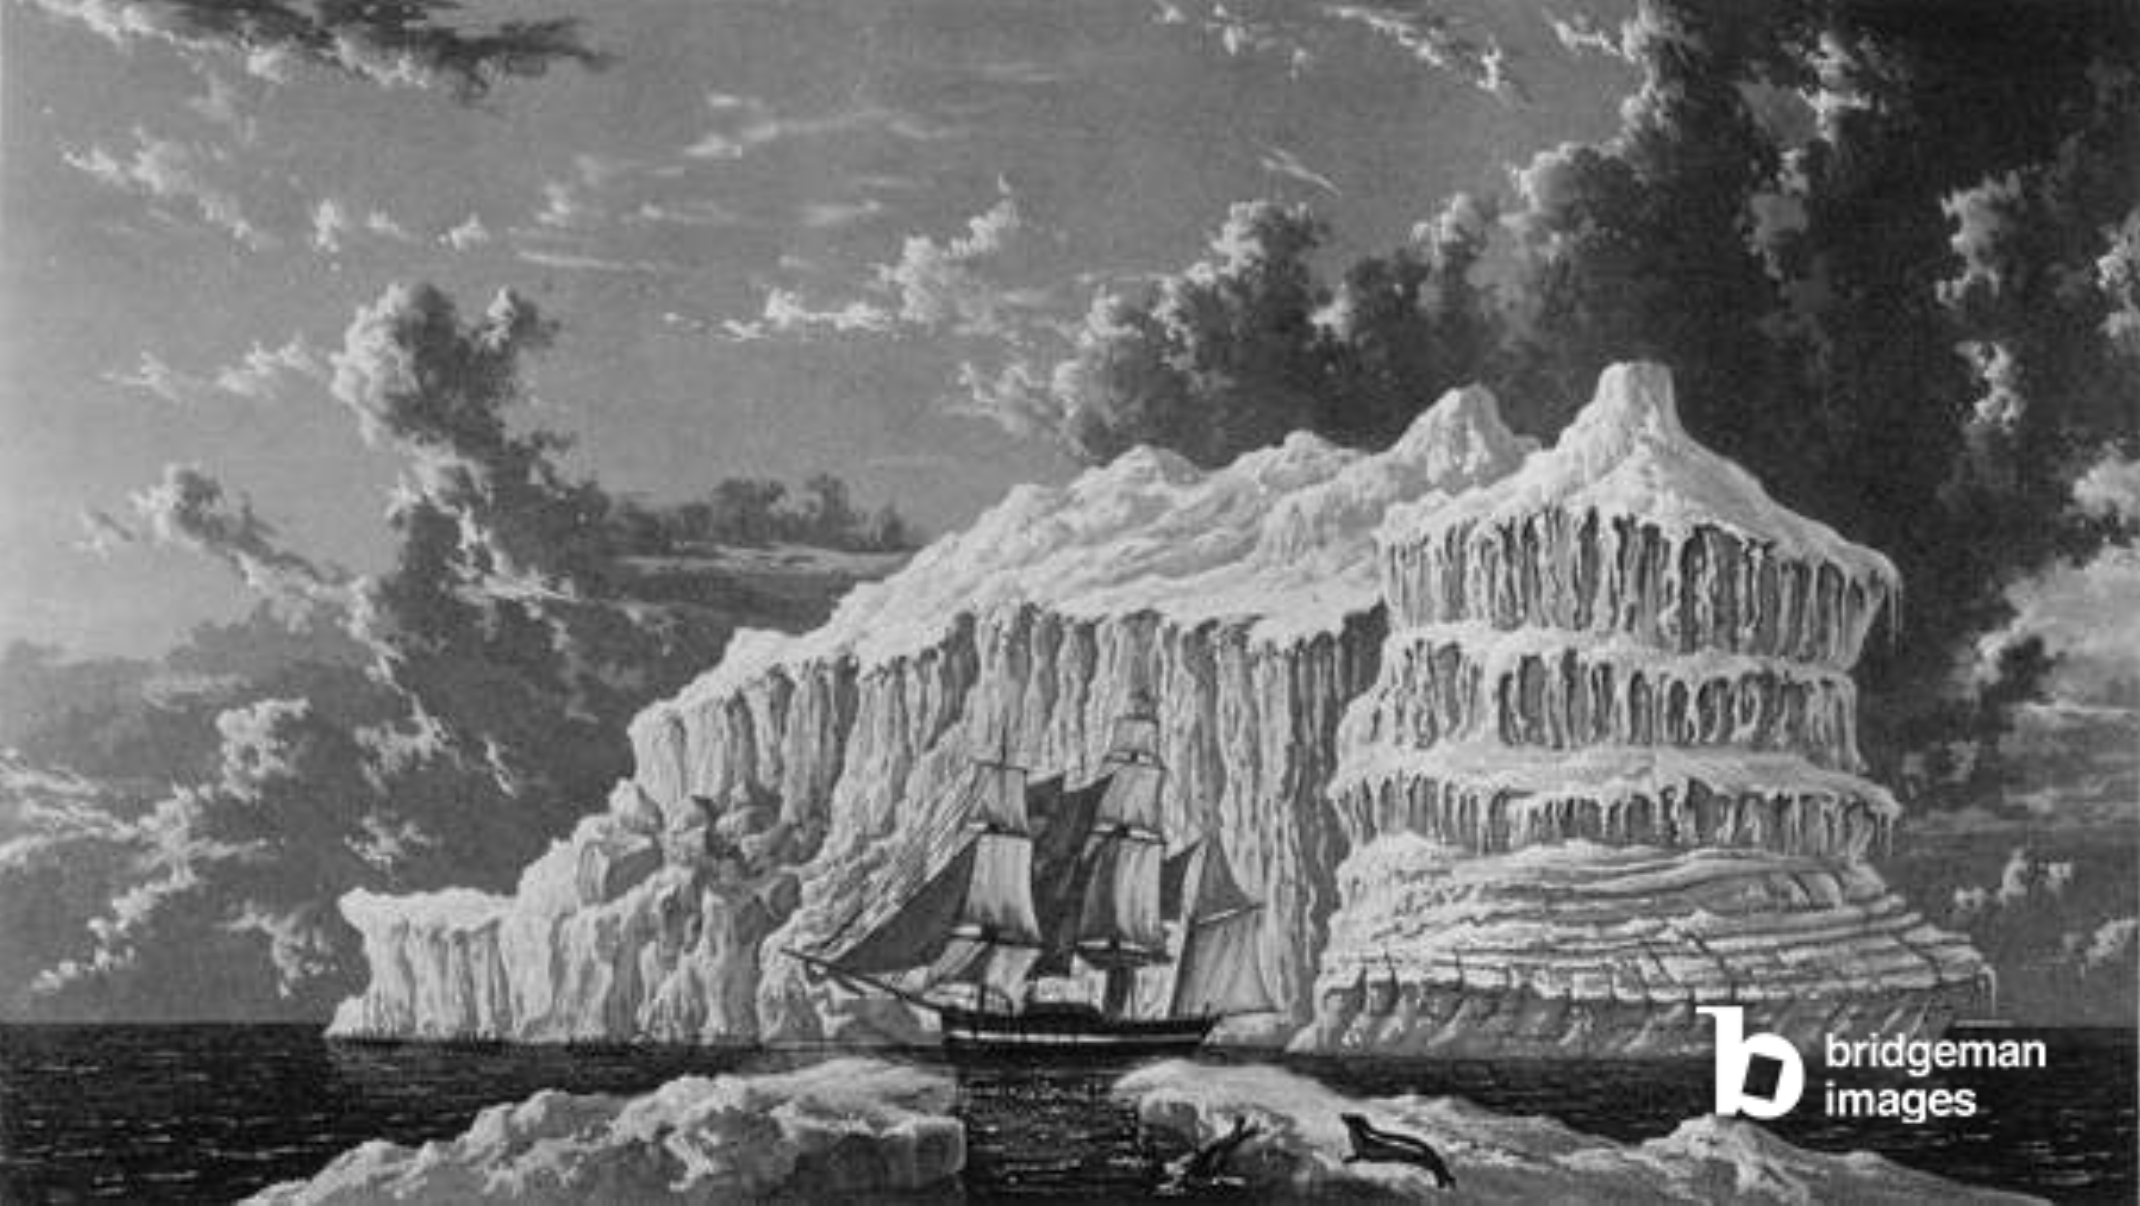 Iceberg in Baffin's Bay, July 1819, from 'Journal of a Voyage for the Discovery of a North West Passage from the Atlantic to the Pacific performed in the Years 1819-20', by William Edward Parry, published 1821 (engraving), Westall, William (1781-1850) / National Museum of the Royal Navy, Portsmouth, Hampshire, UK / © National Museum of the Royal Navy / Bridgeman Images